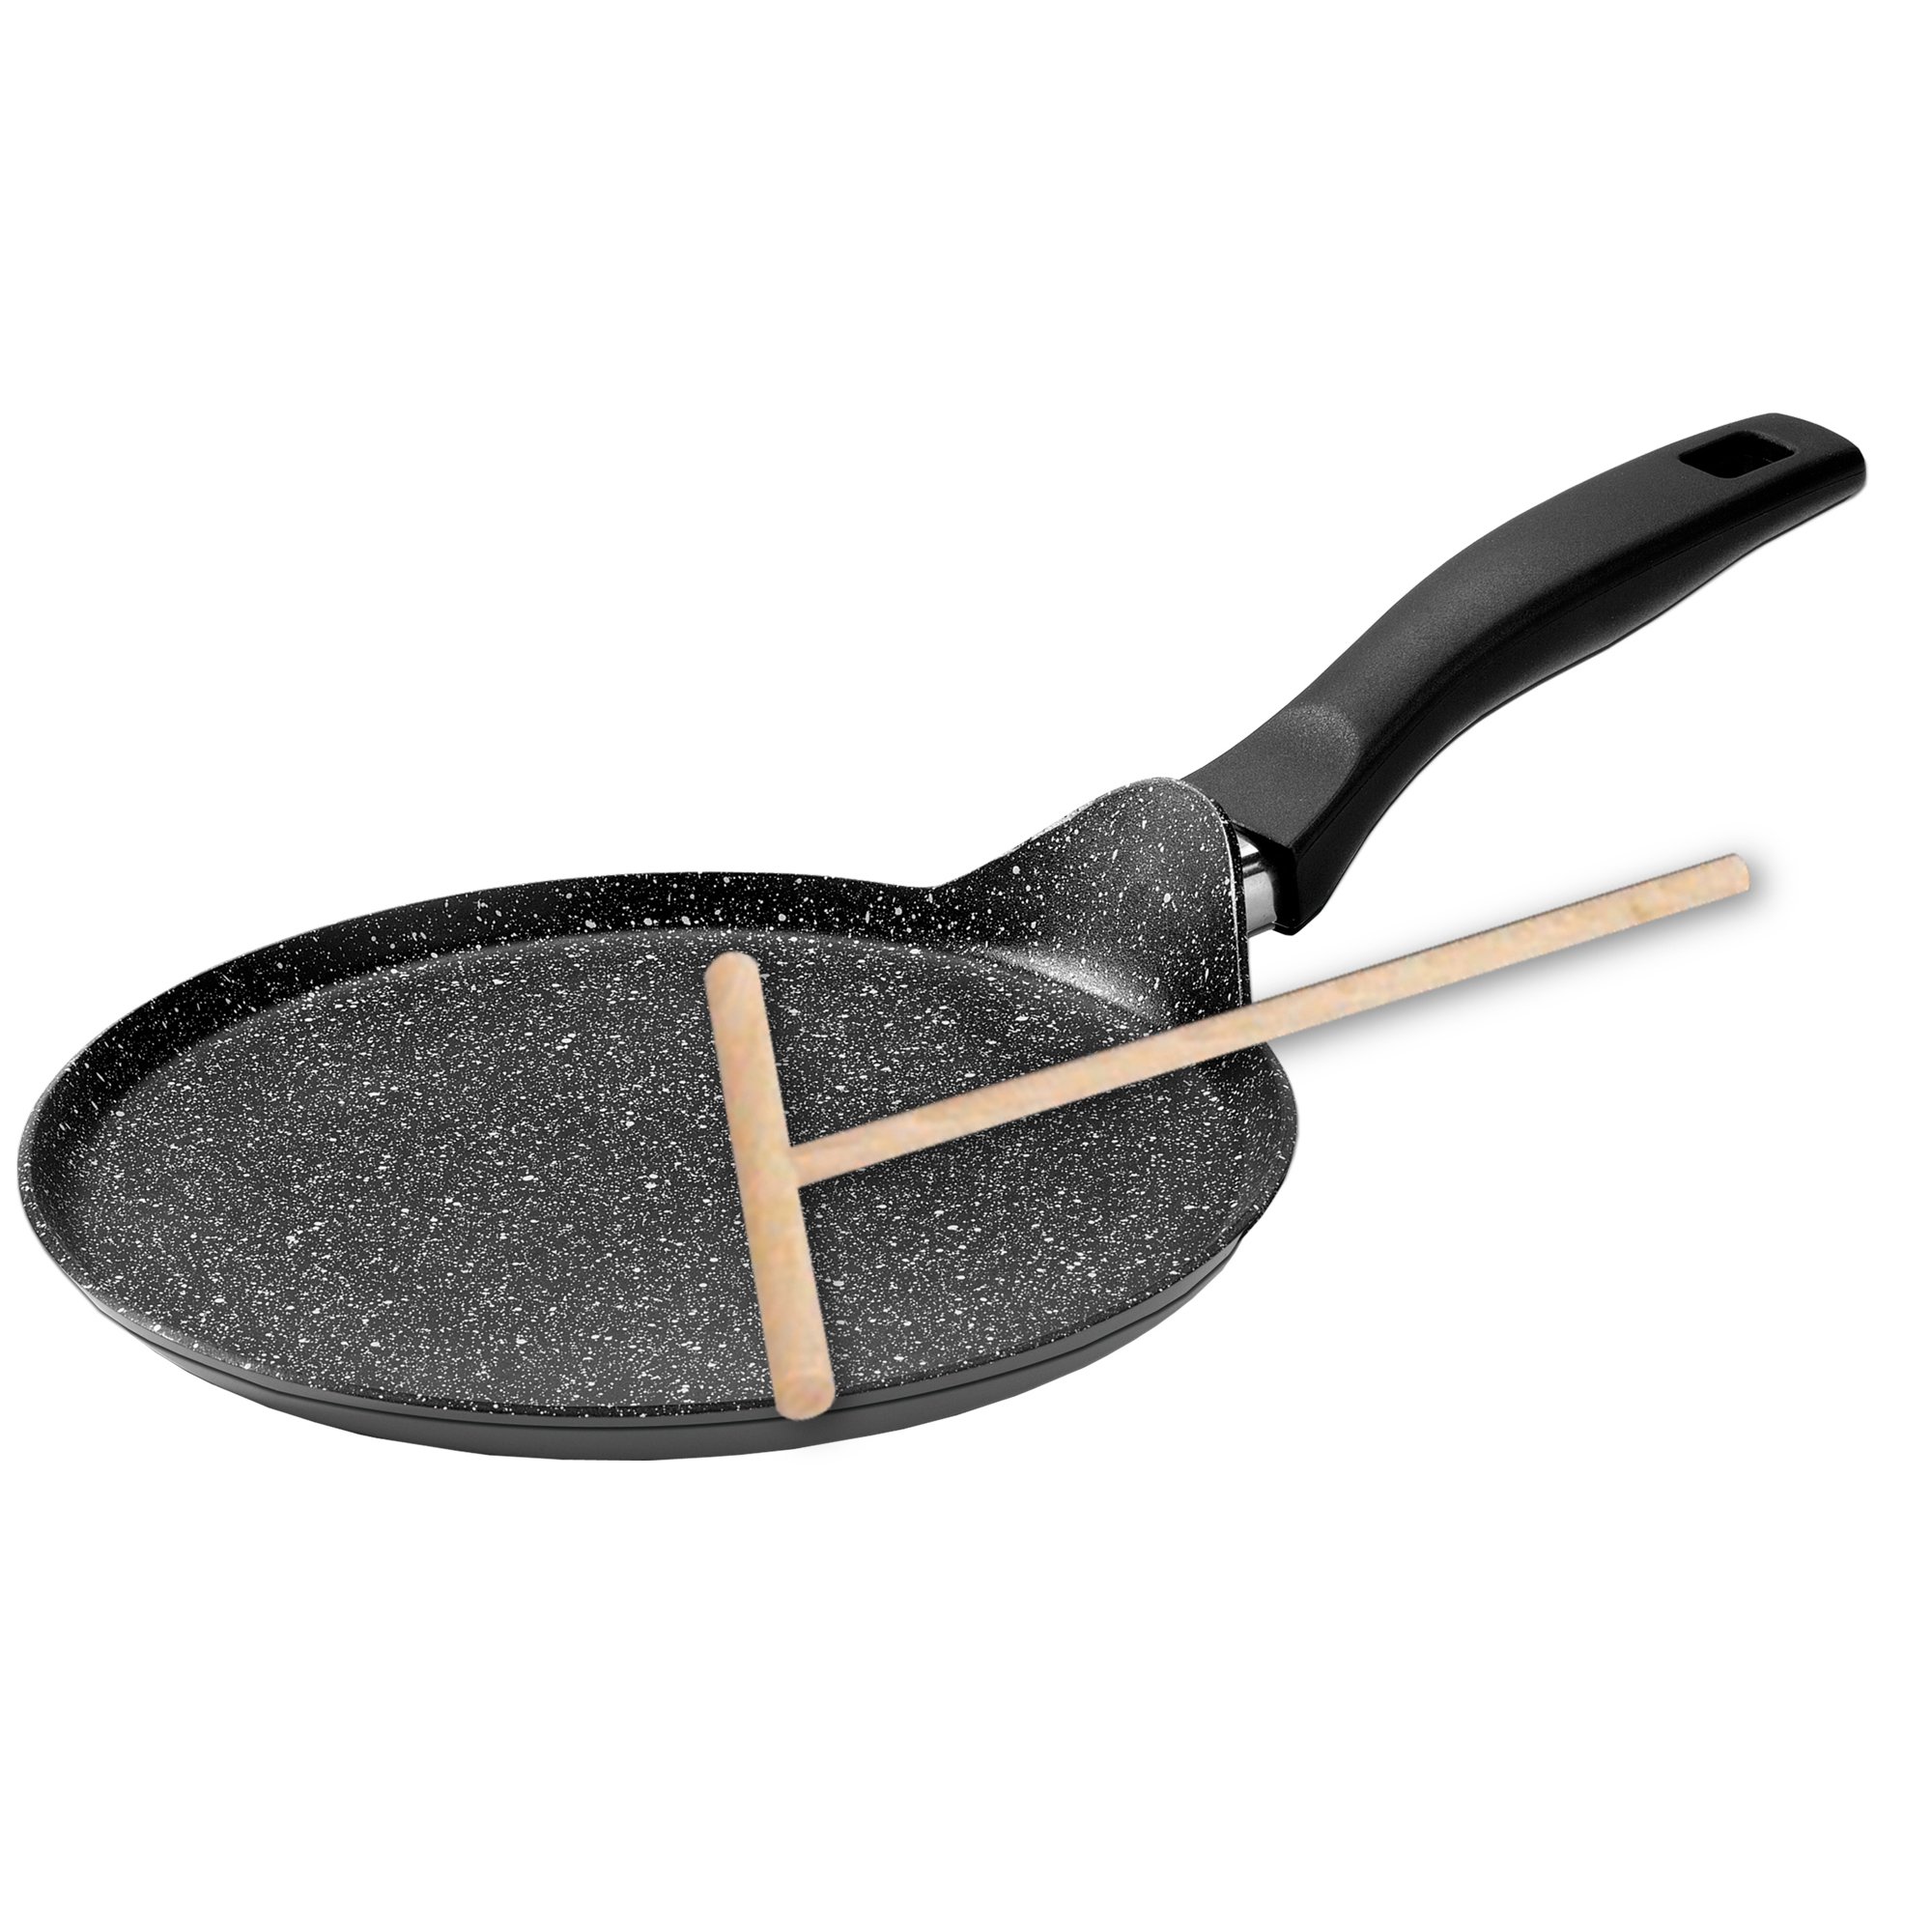 STONELINE® Crepe Pan 25 cm, with Batter Spreader, Flat Non-Stick Pan | CLASSIC